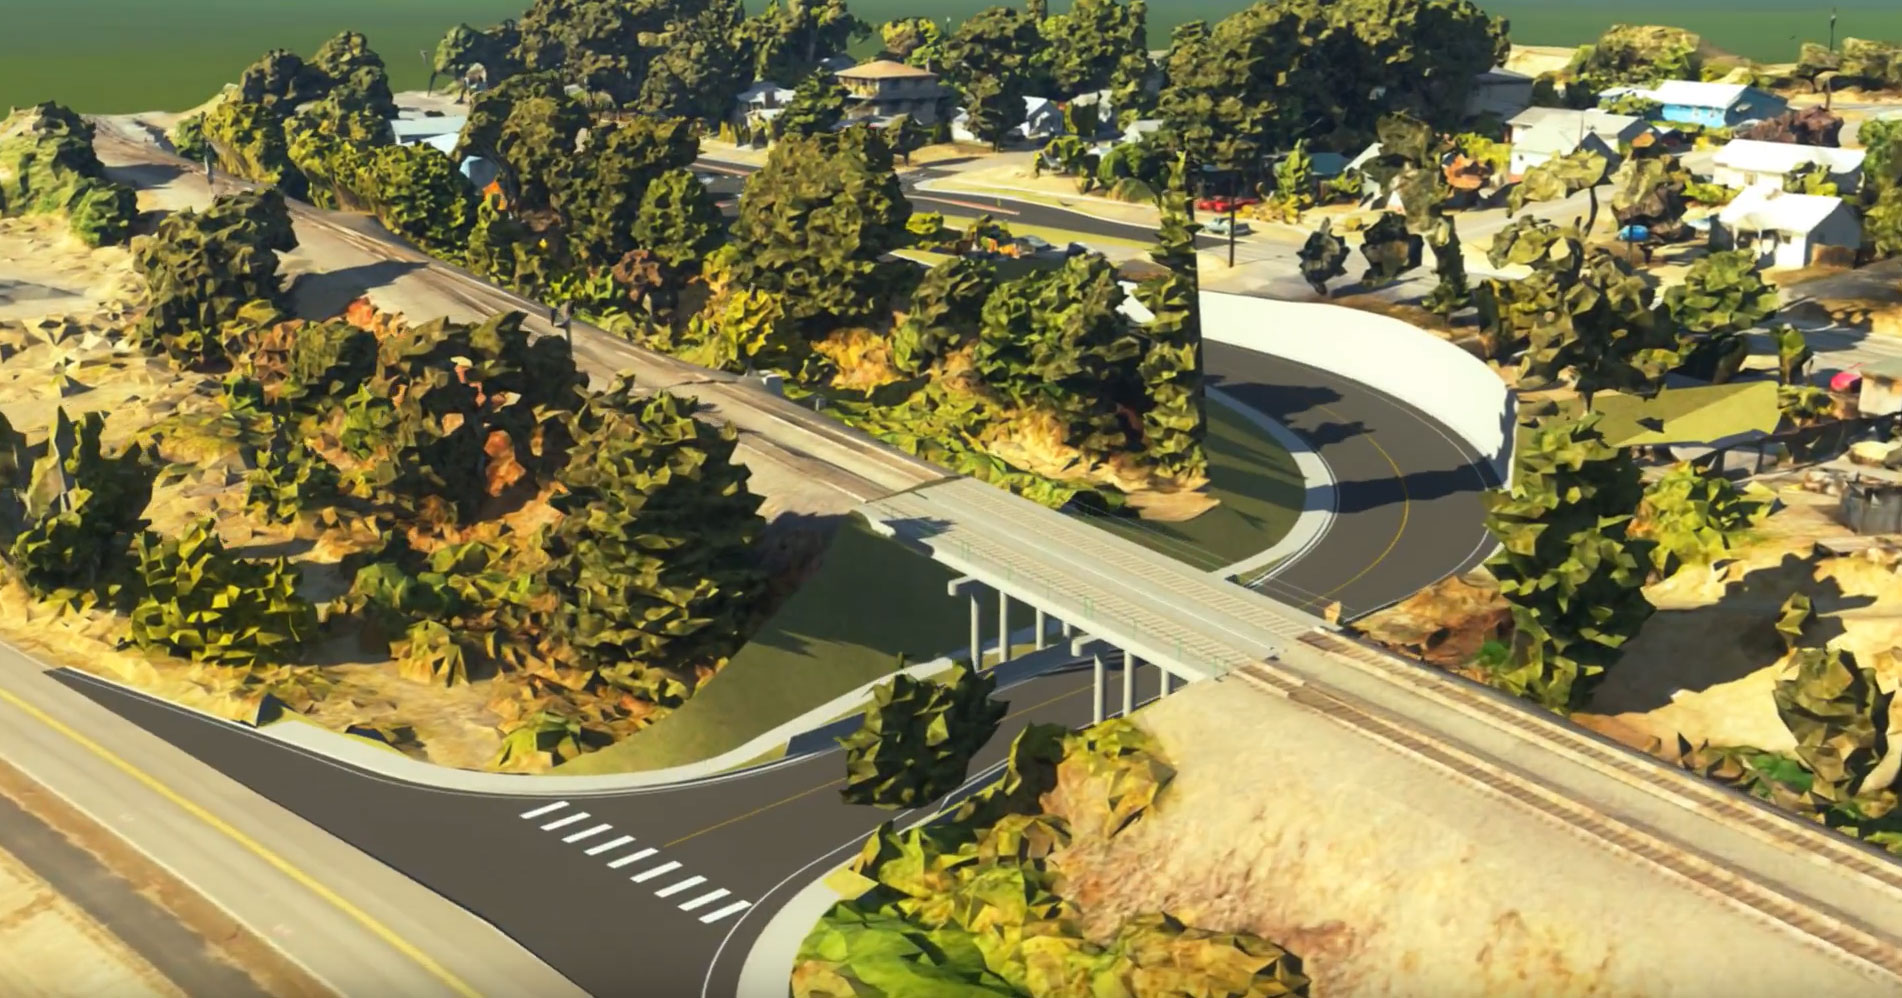 New roundabout and roadway connection combined with reality mesh.